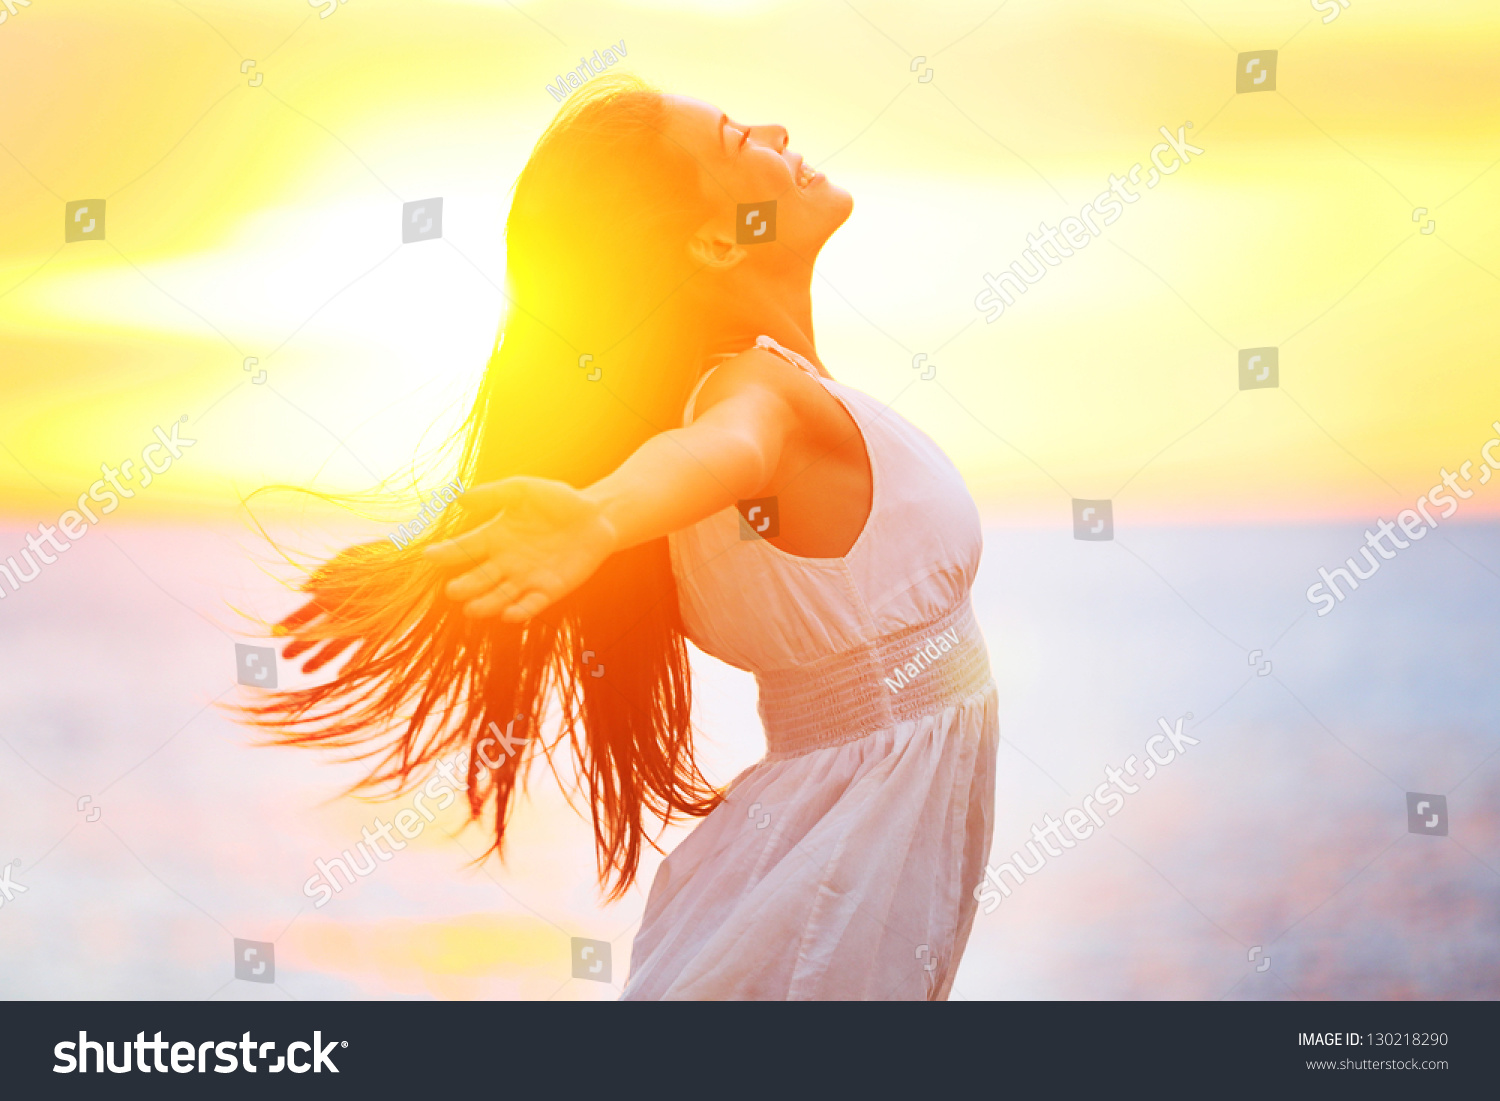 Enjoyment - free happy woman enjoying sunset. Beautiful woman in white dress embracing the golden sunshine glow of sunset with arms outspread and face raised in sky enjoying peace, serenity in nature #130218290